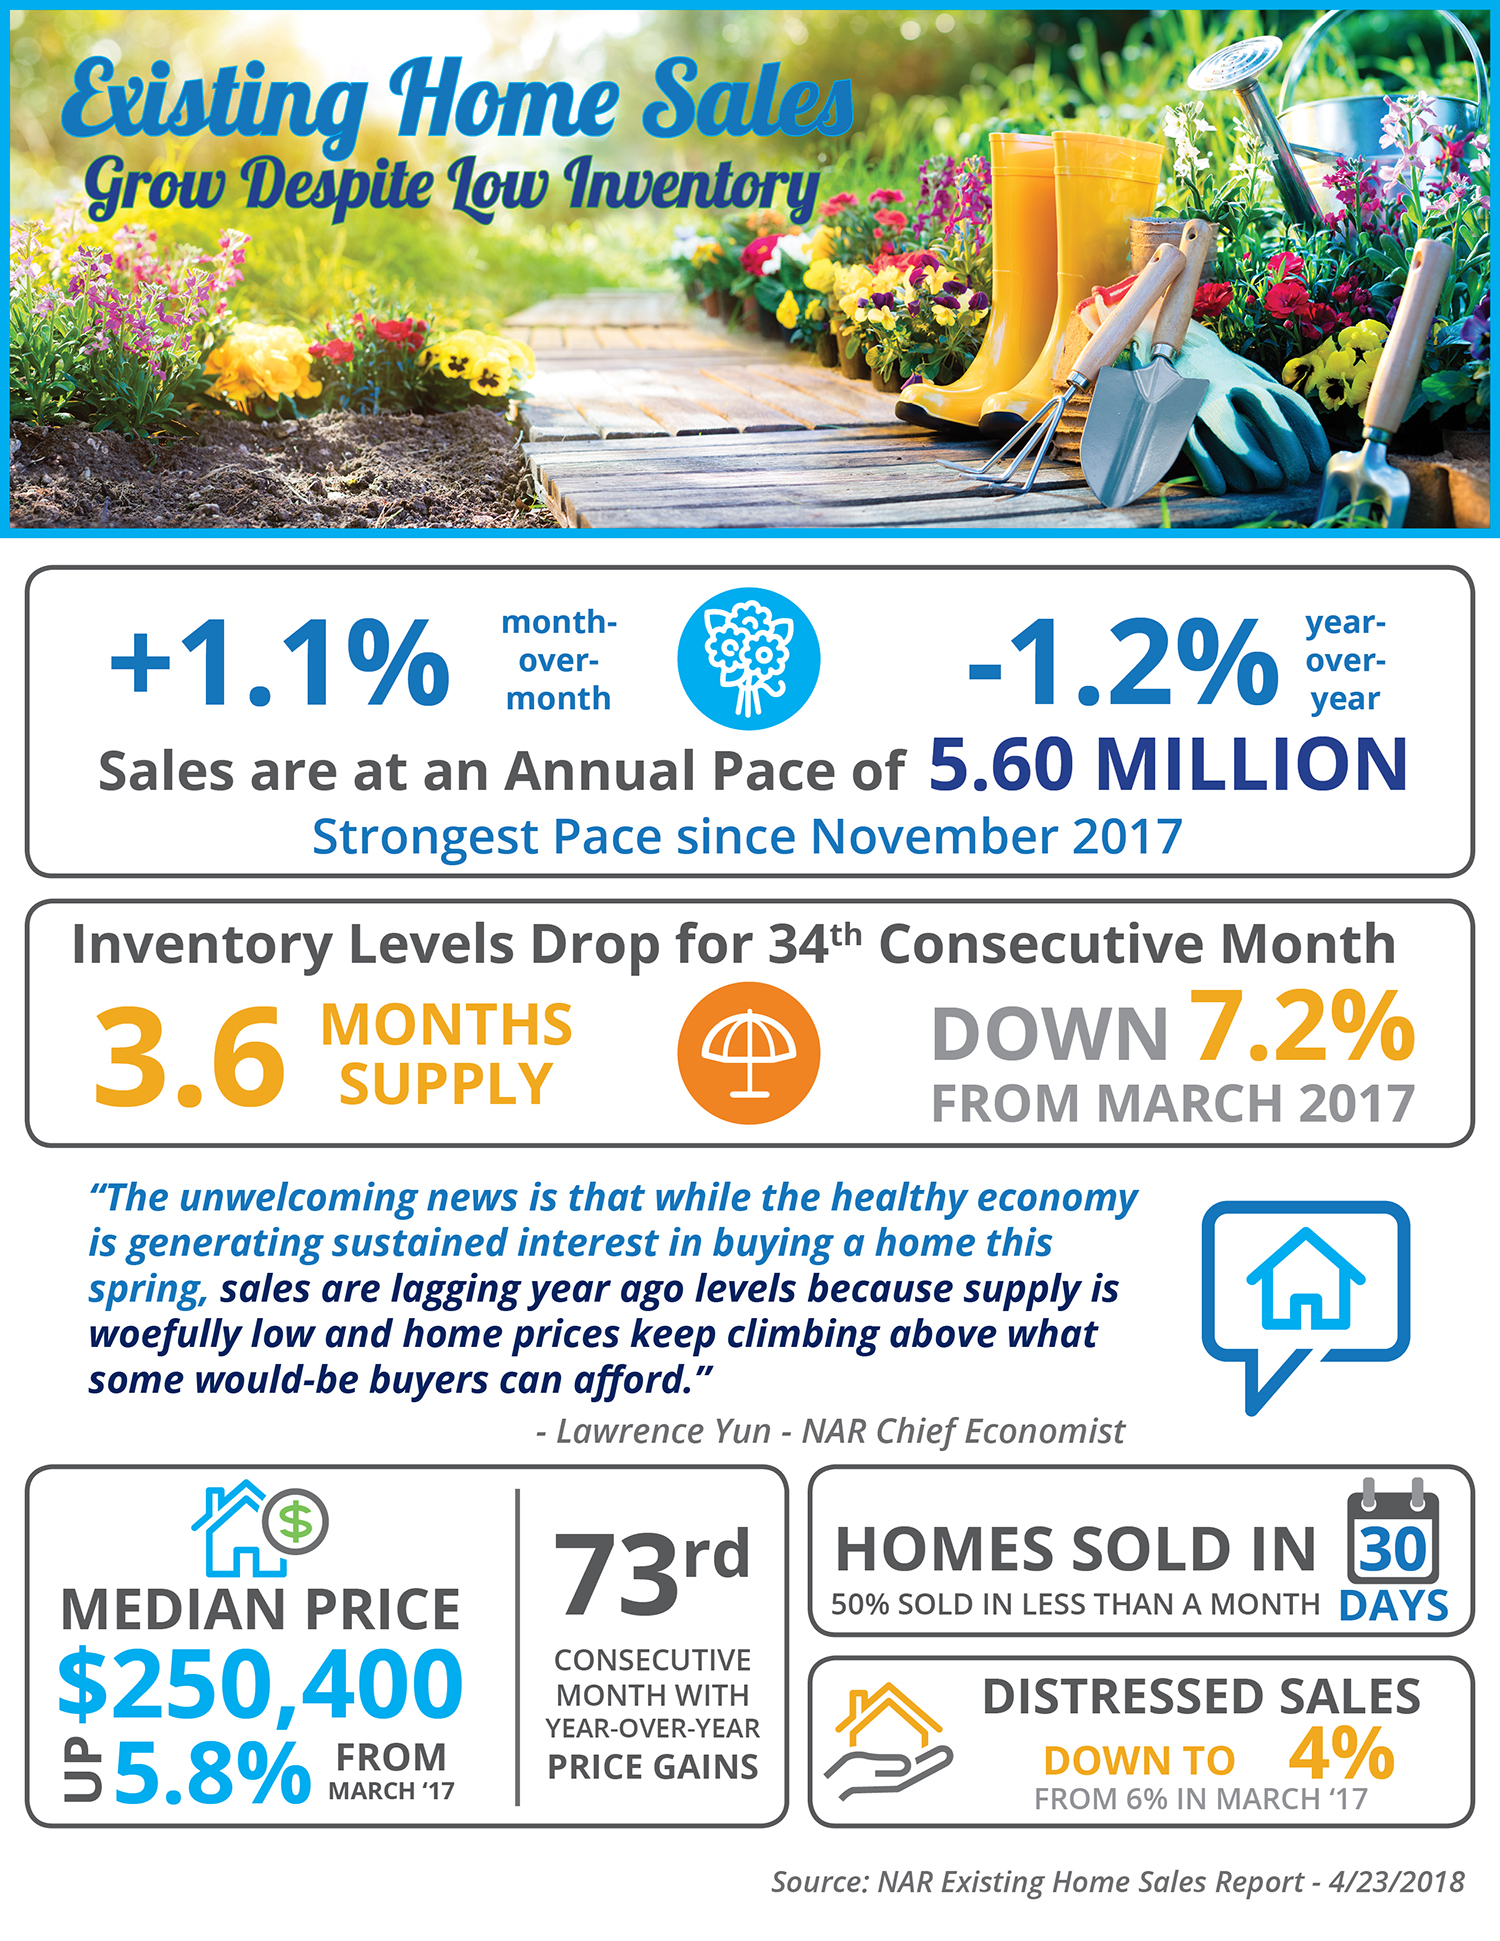 Existing Home Sales Grow Despite Low Inventory [INFOGRAPHIC] | Simplifying the Market